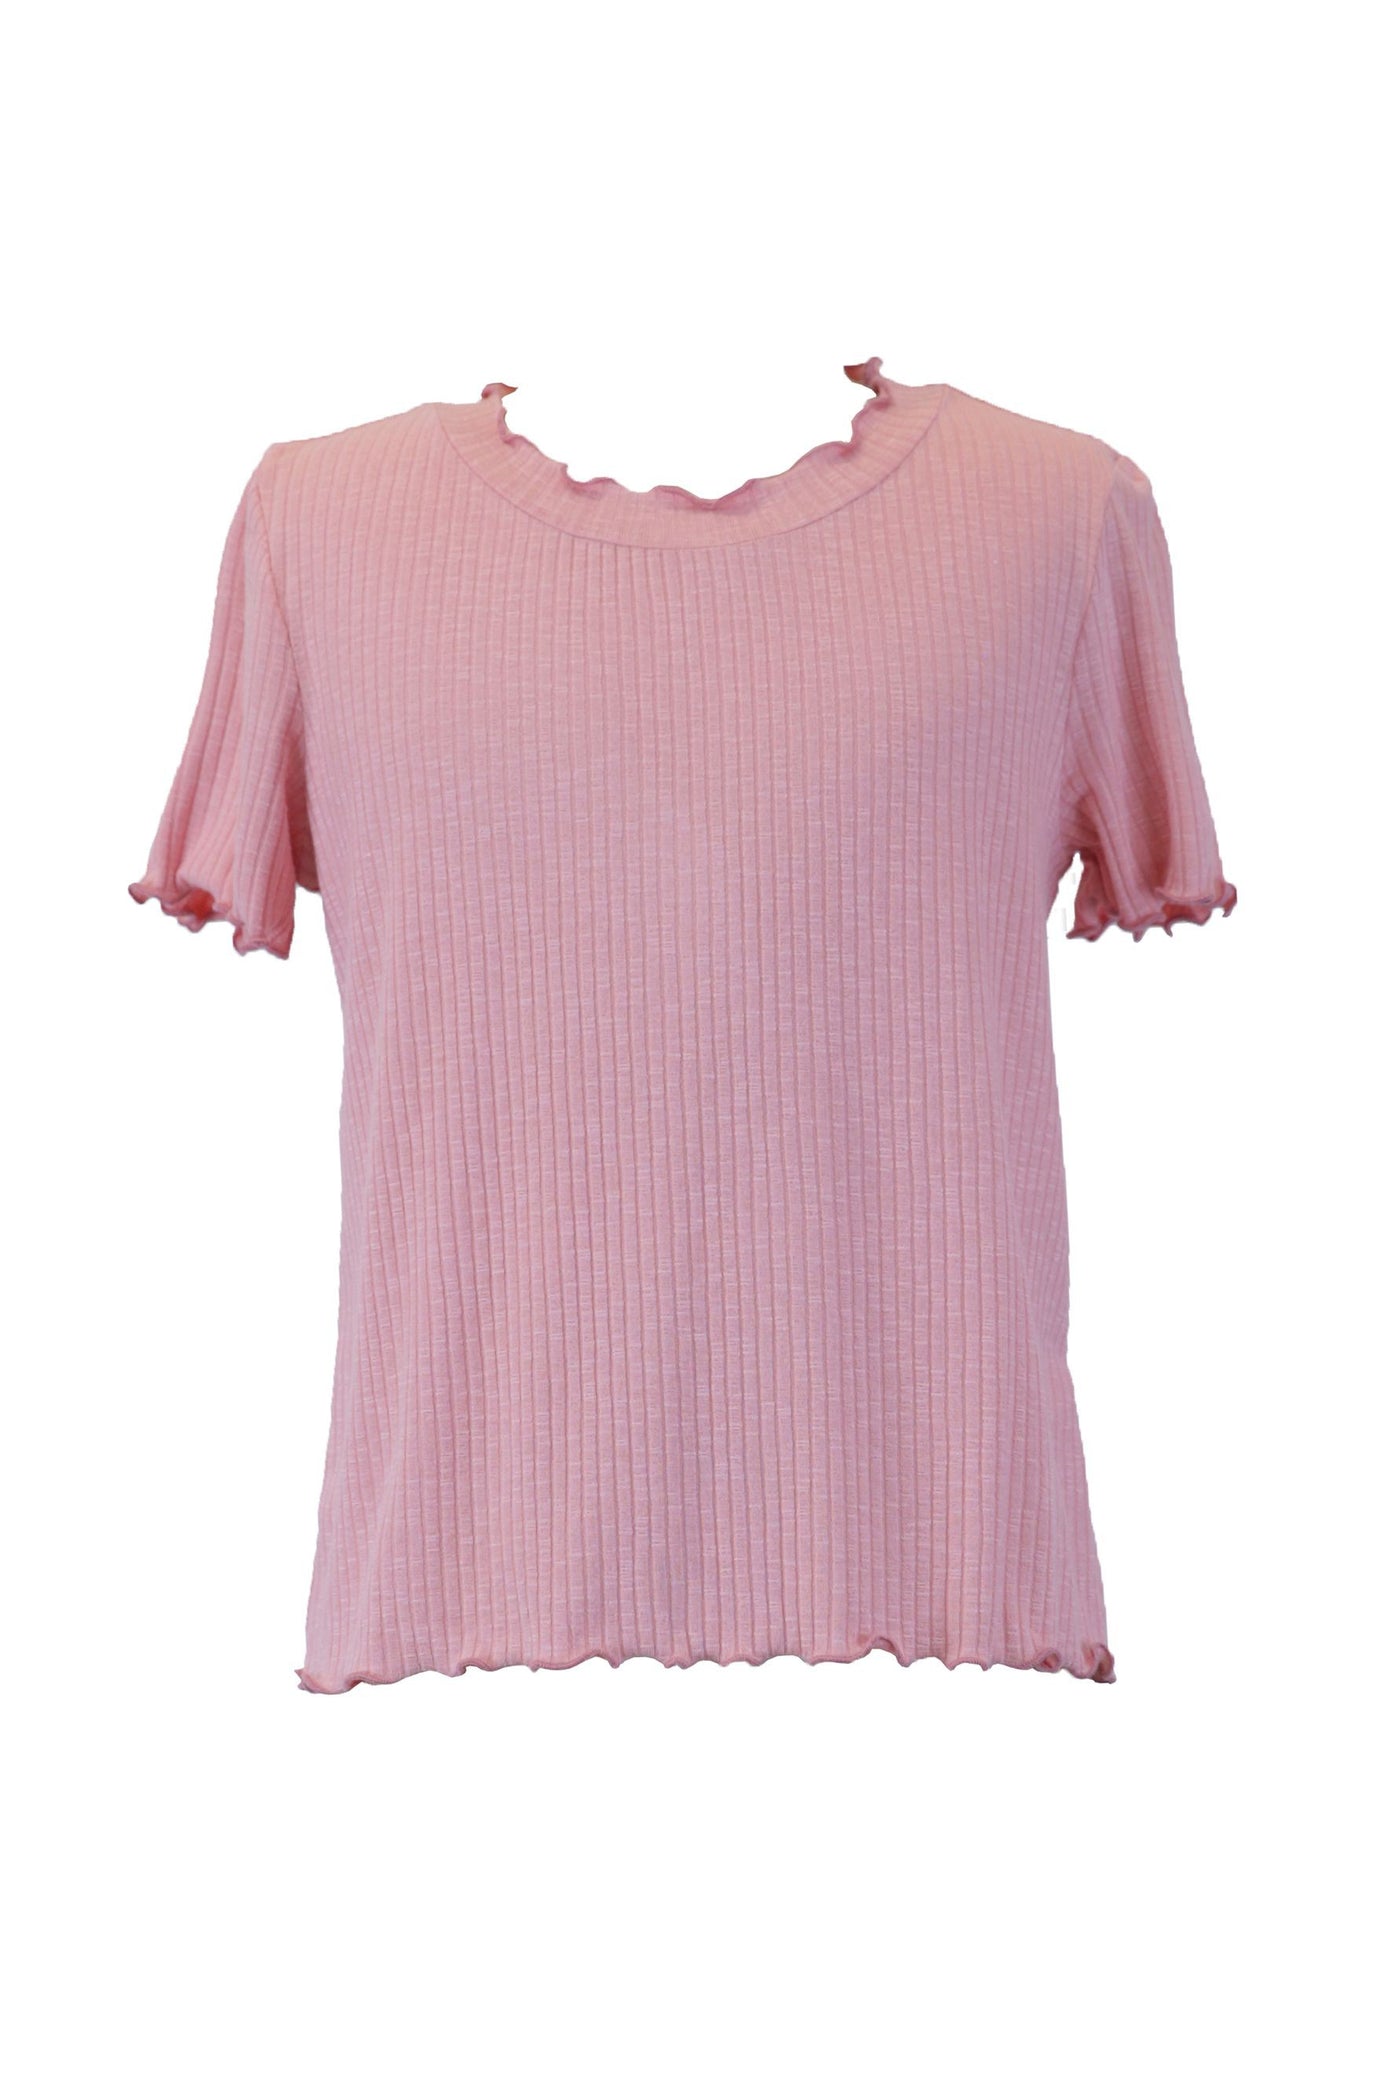 coral ribbed top with lettuce hem